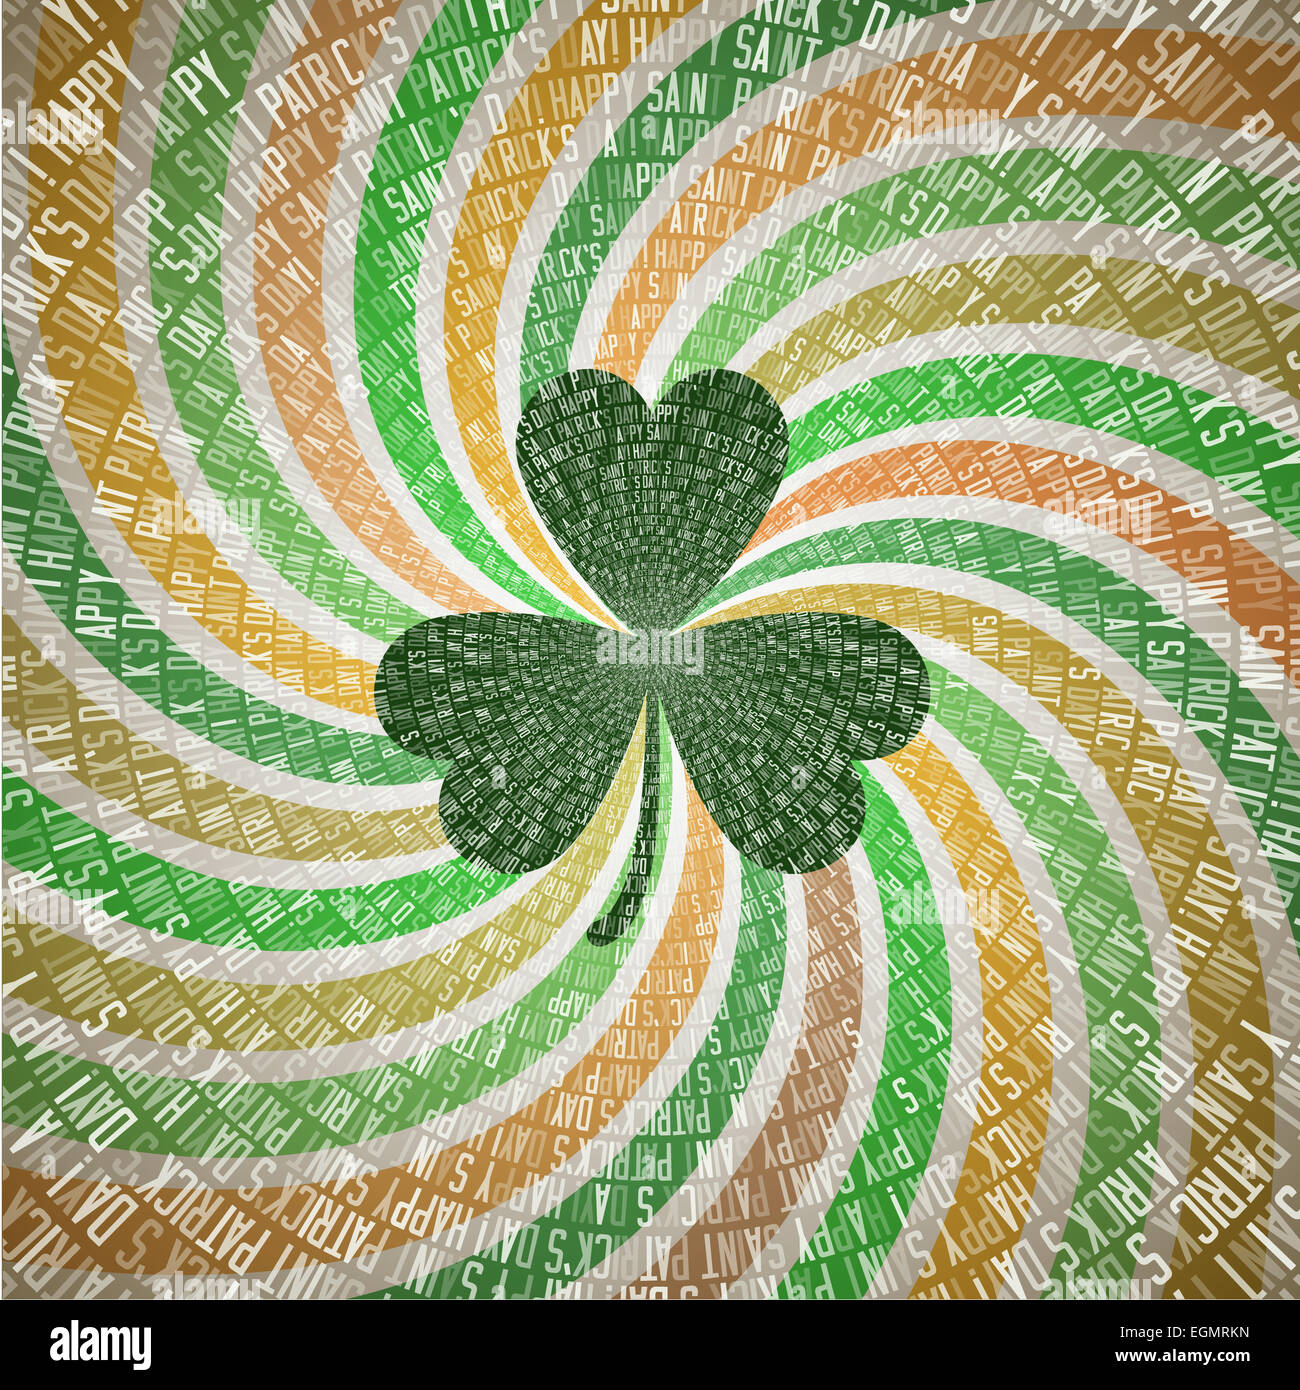 Saint Patricks Day Greeting Card with Clover Leaf on Abstract Geometric Fanning Twirl Rays Background in Vintage Shades of Green and Orange Irish Flag Stock Photo